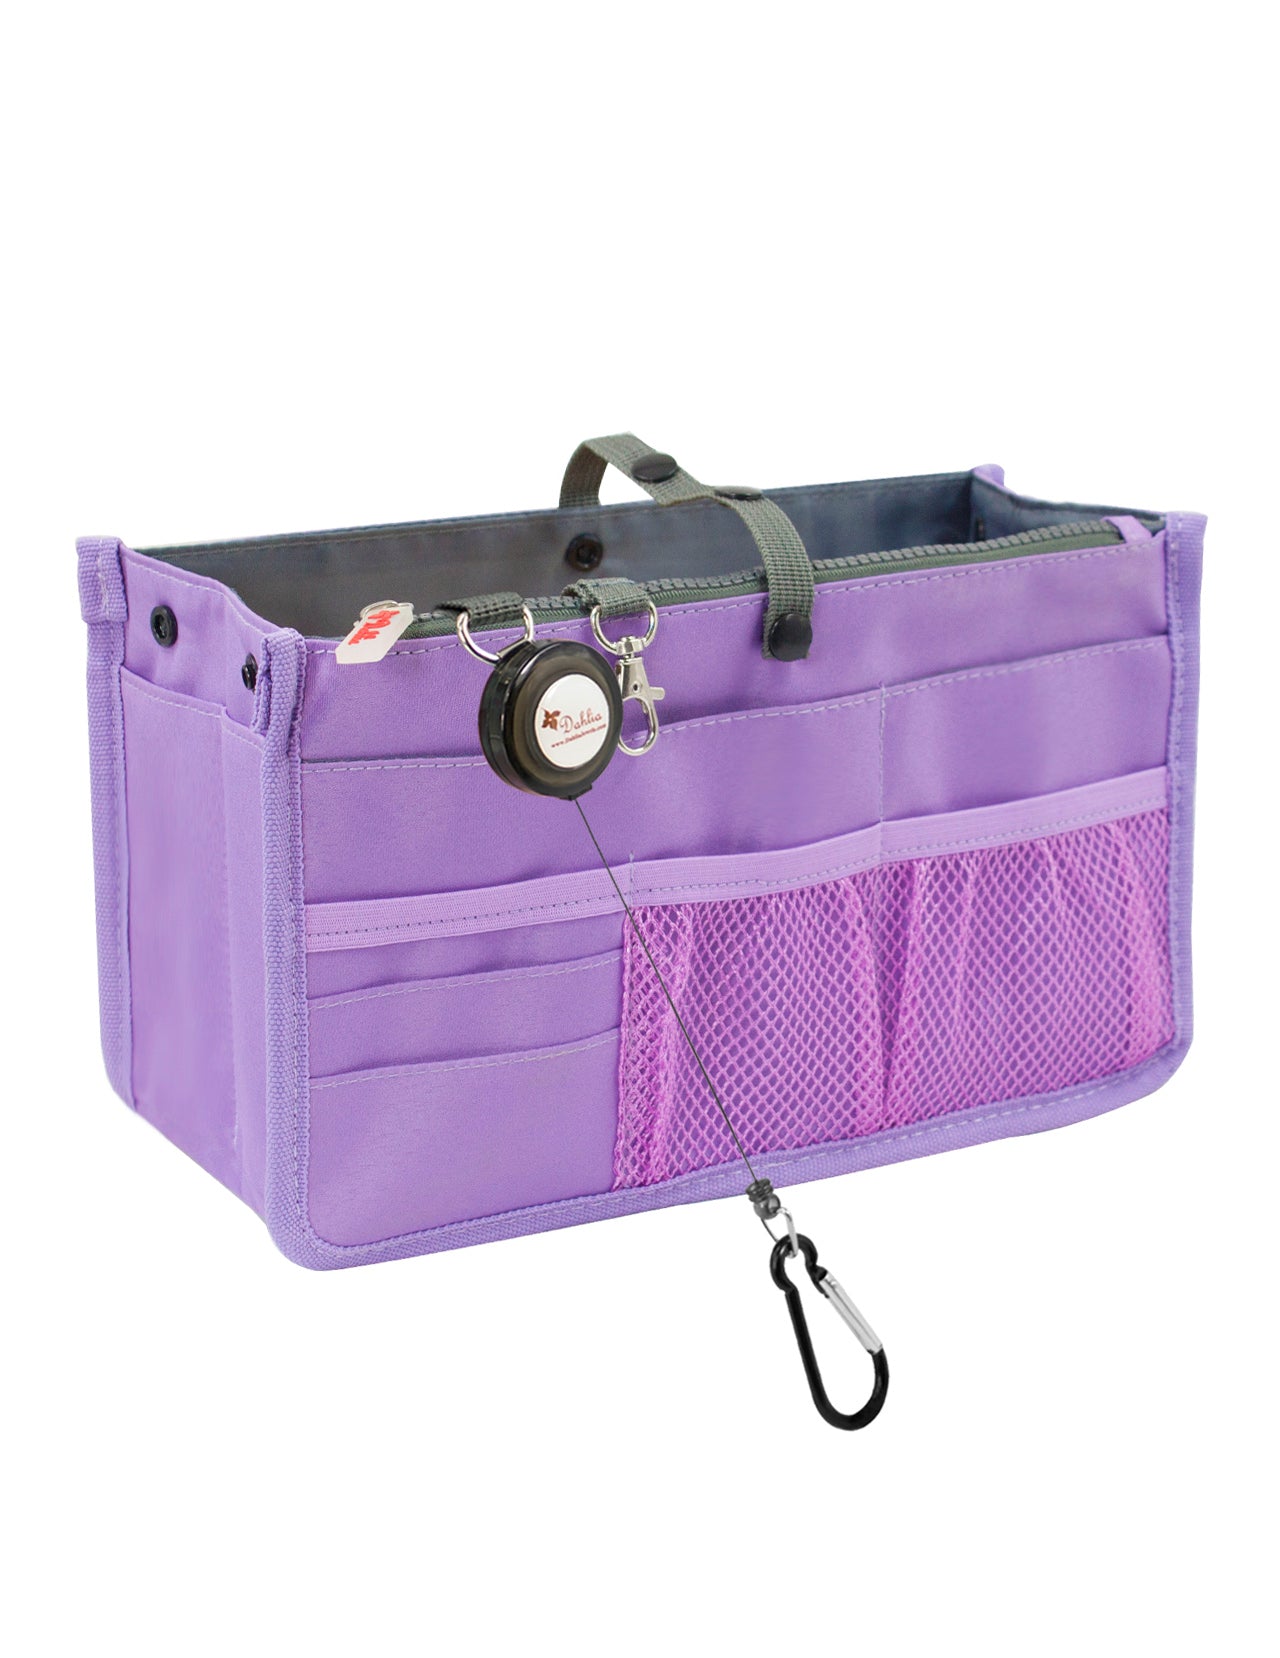 ON SALE / Marmont-Top-Handle-M / 2mm Lavender) Bag Organizer for